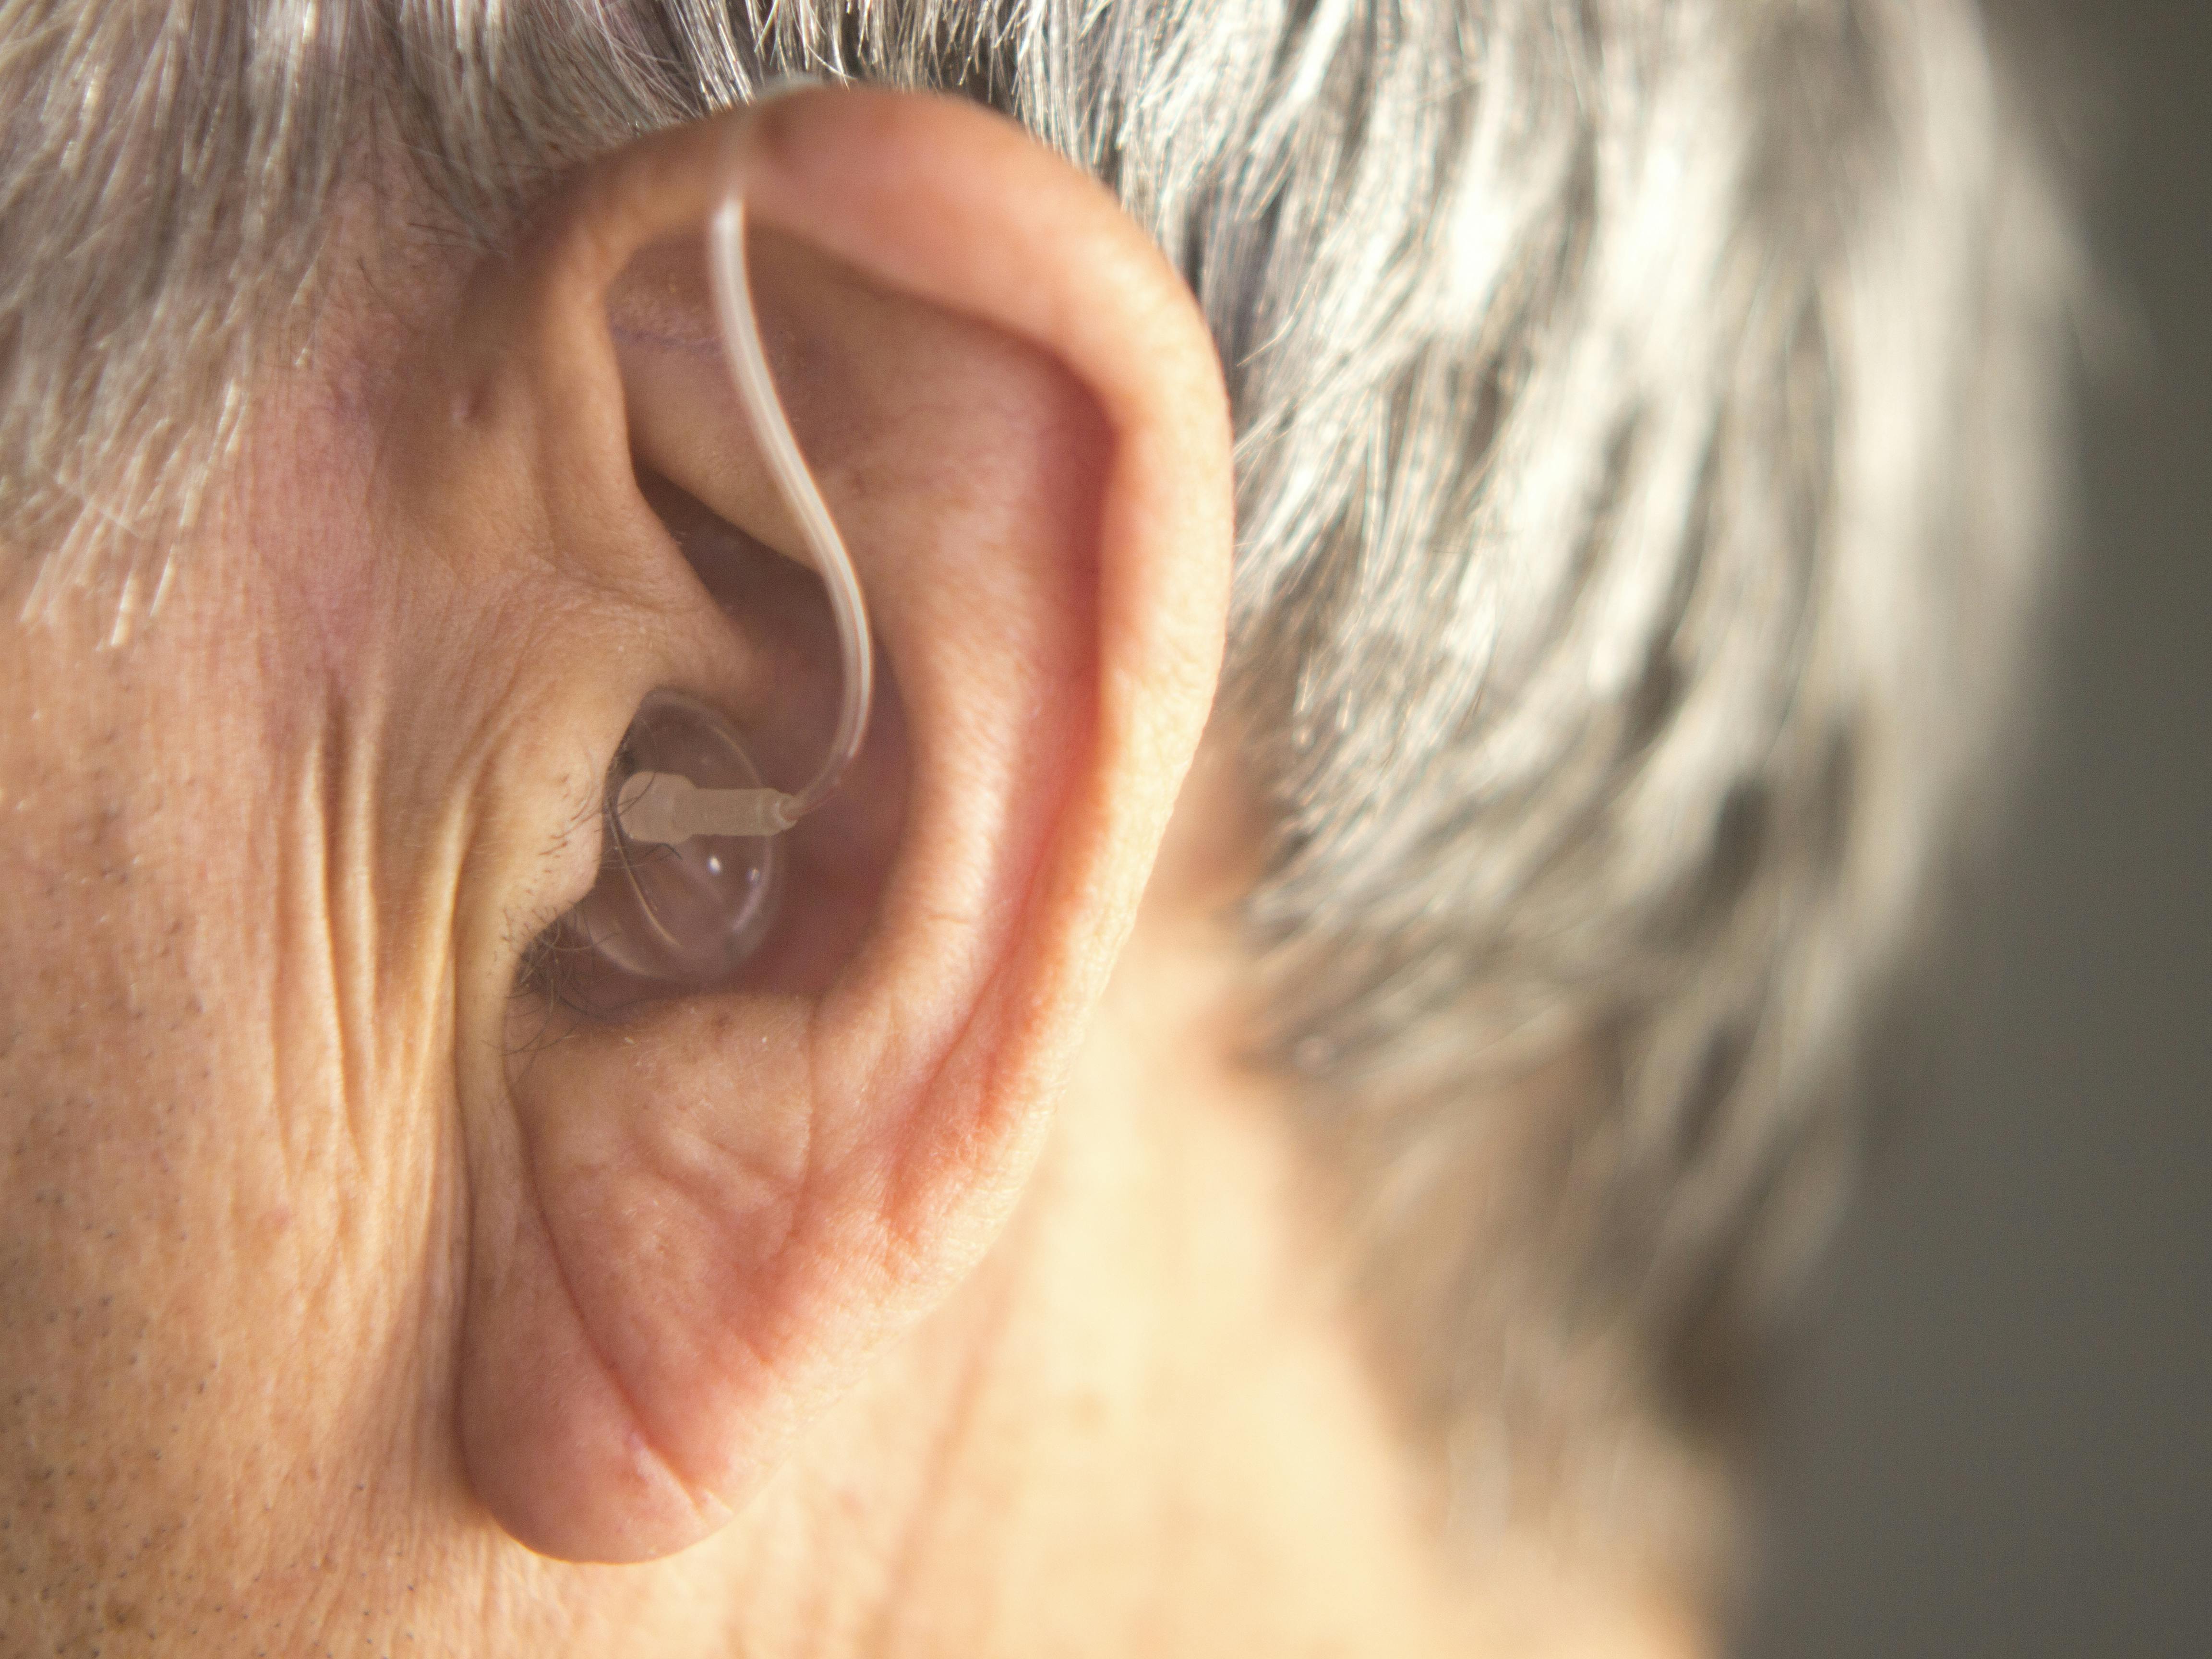 Digital modern hearing aid in the ear of aged old man.